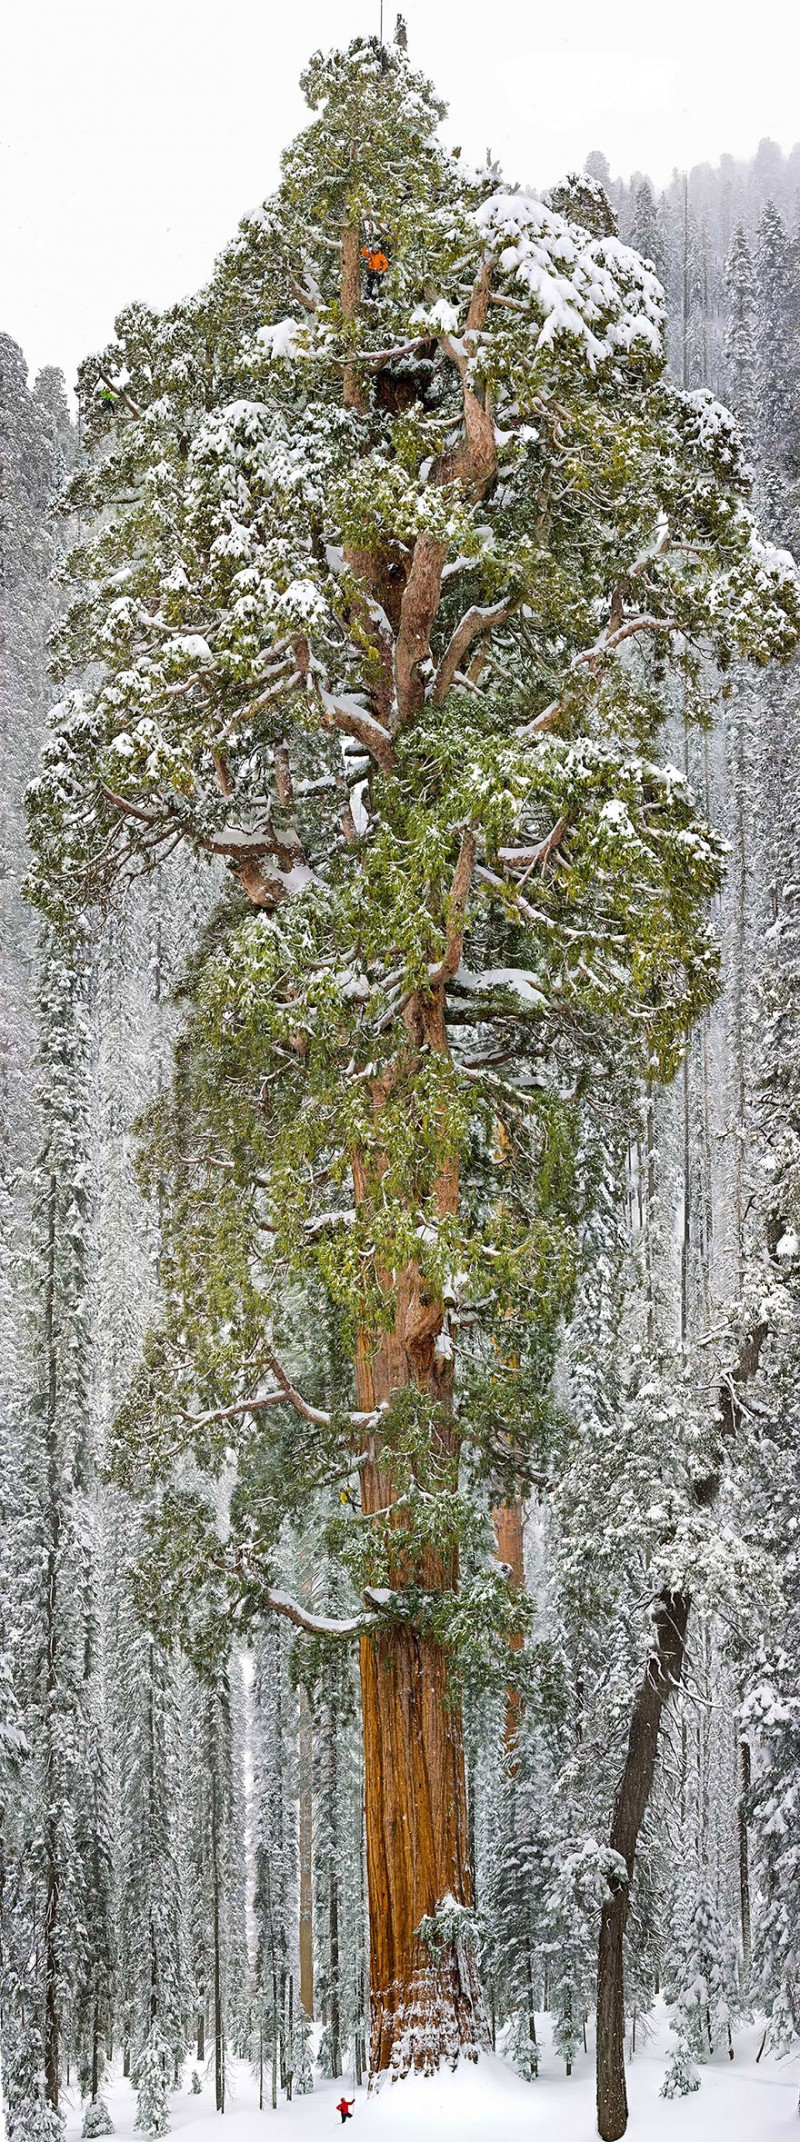 16 Of The Most Magnificent Trees In The World 17